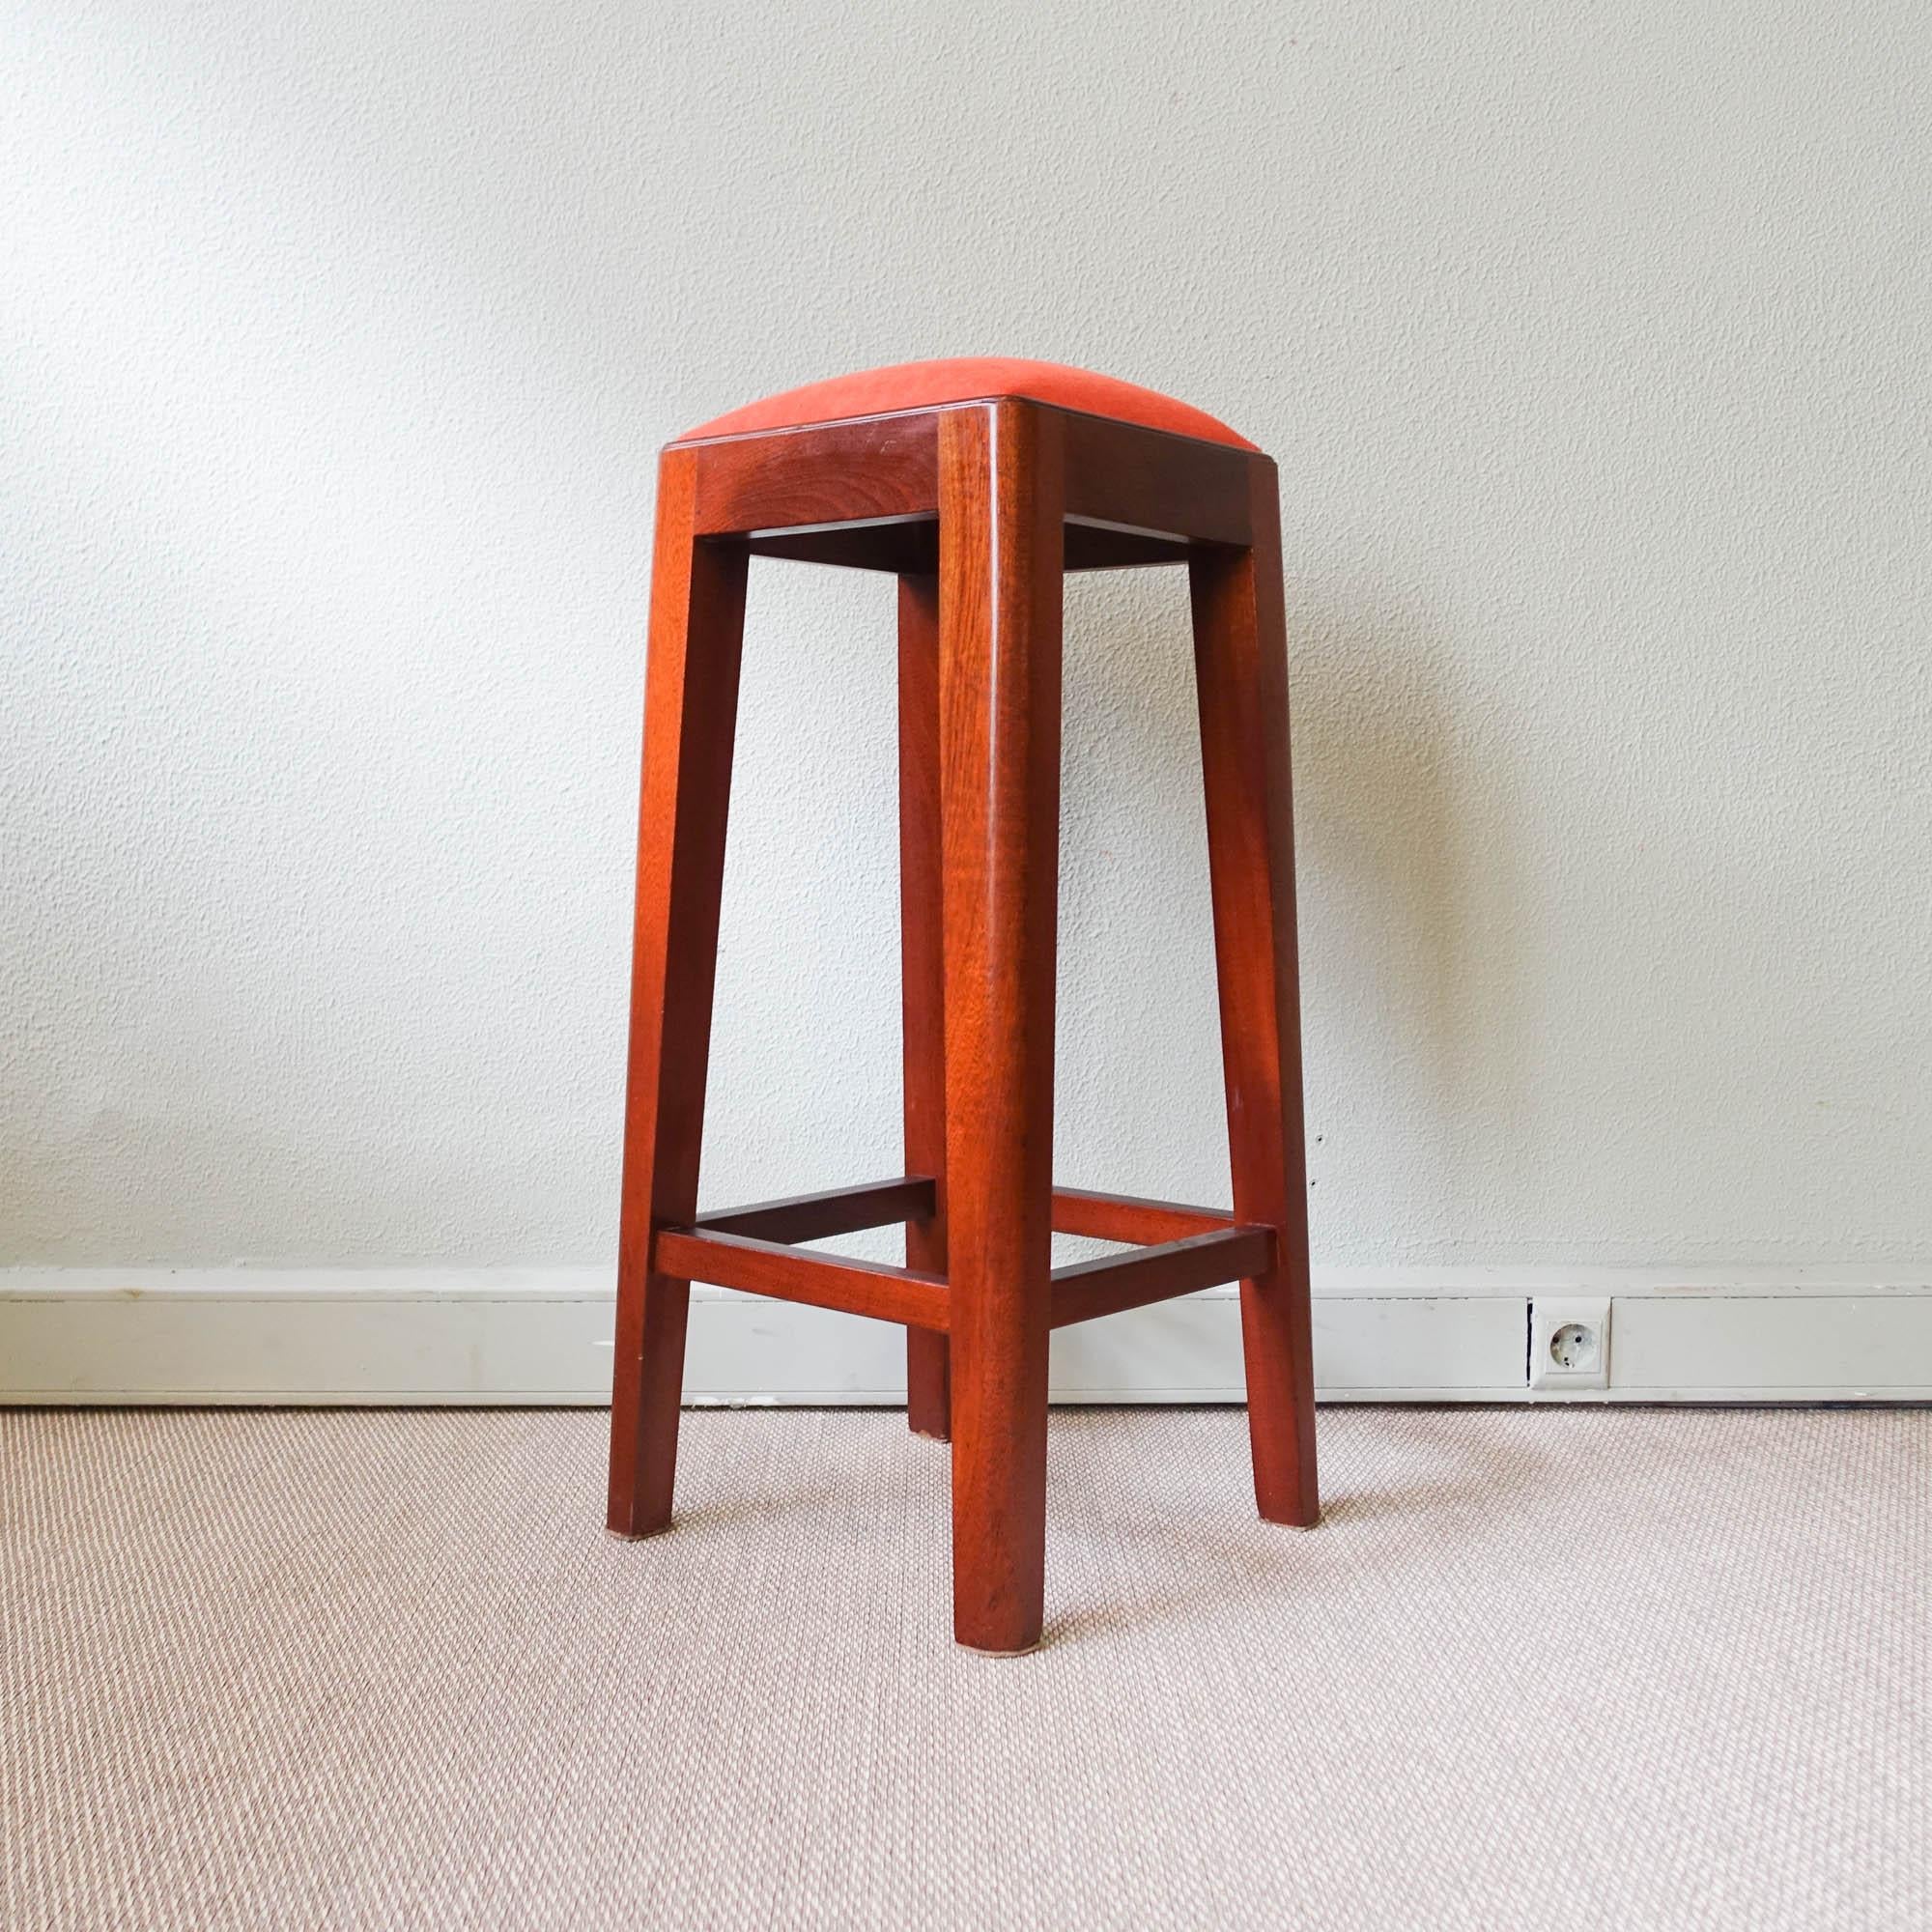 This pair of stools were designed and produced in Portugal, during the 1960's. They are made of solid mutenye, and were reupholstered with a new orange fabric. The wood was cleaned. In original and good vintage condition. Two pairs available. Price